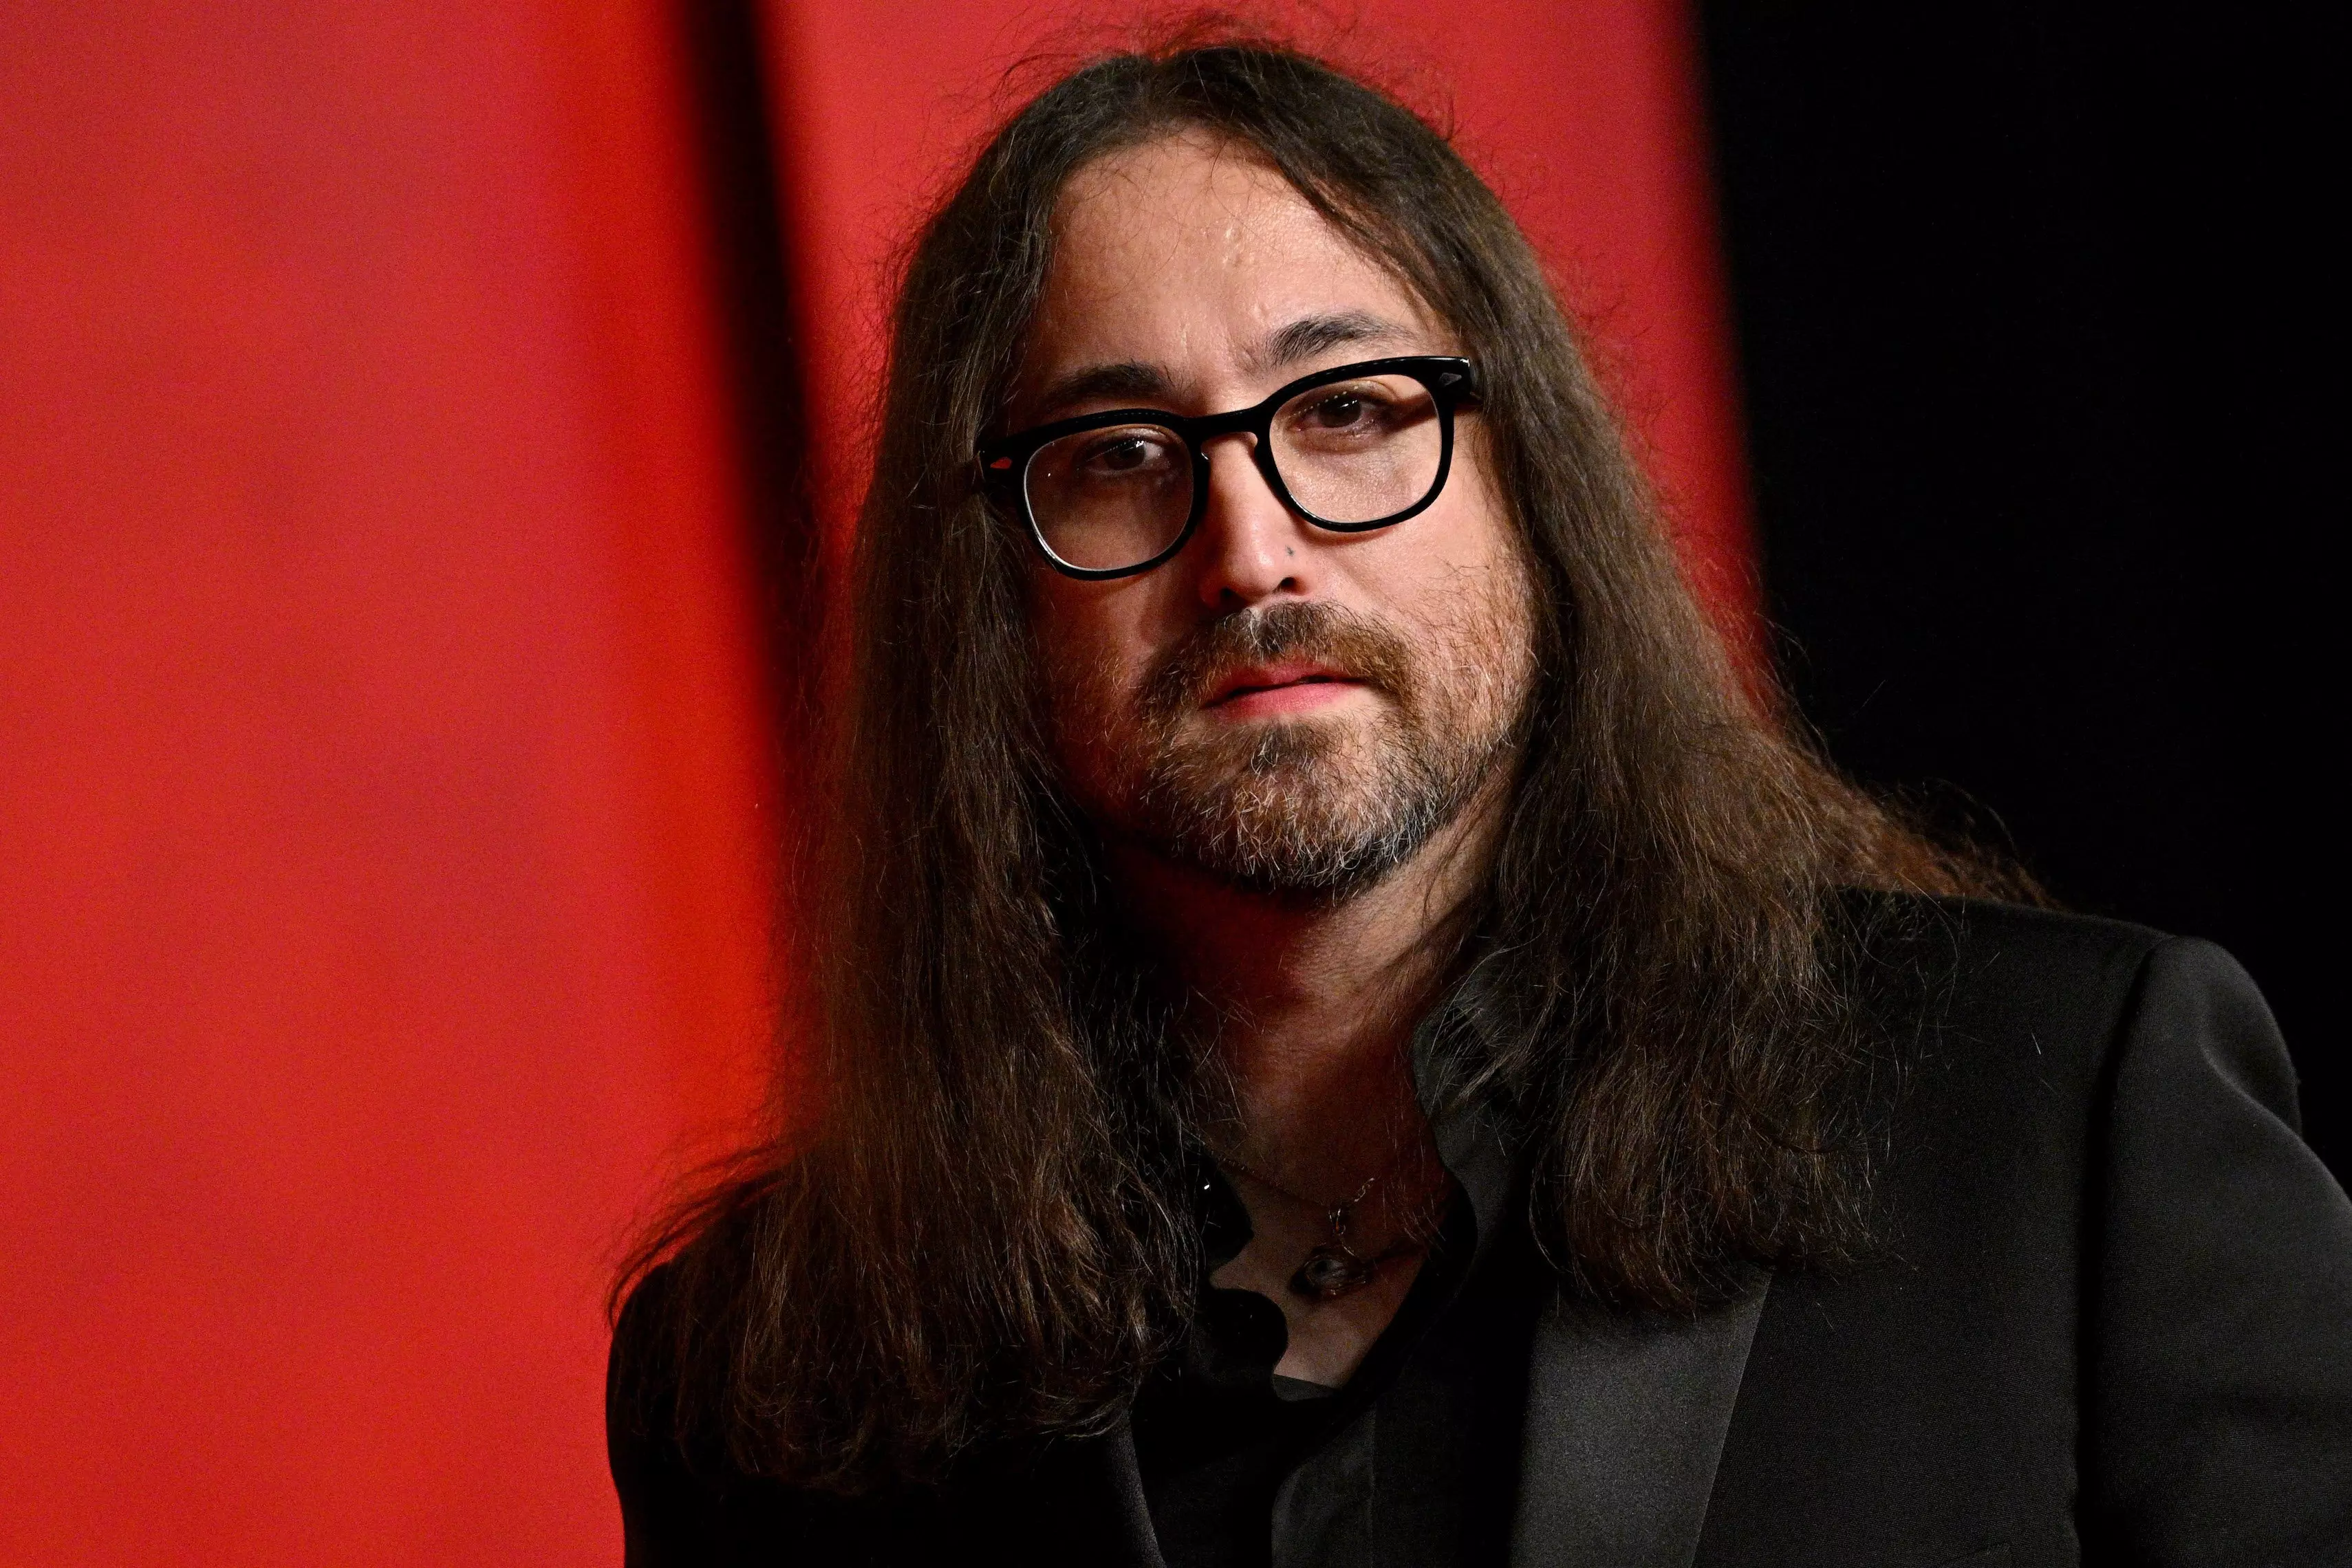 Catching Up With Sean Ono Lennon: His New Album 'Asterisms,' 'War Is Over!' Short & Shouting Out Yoko At The Oscars